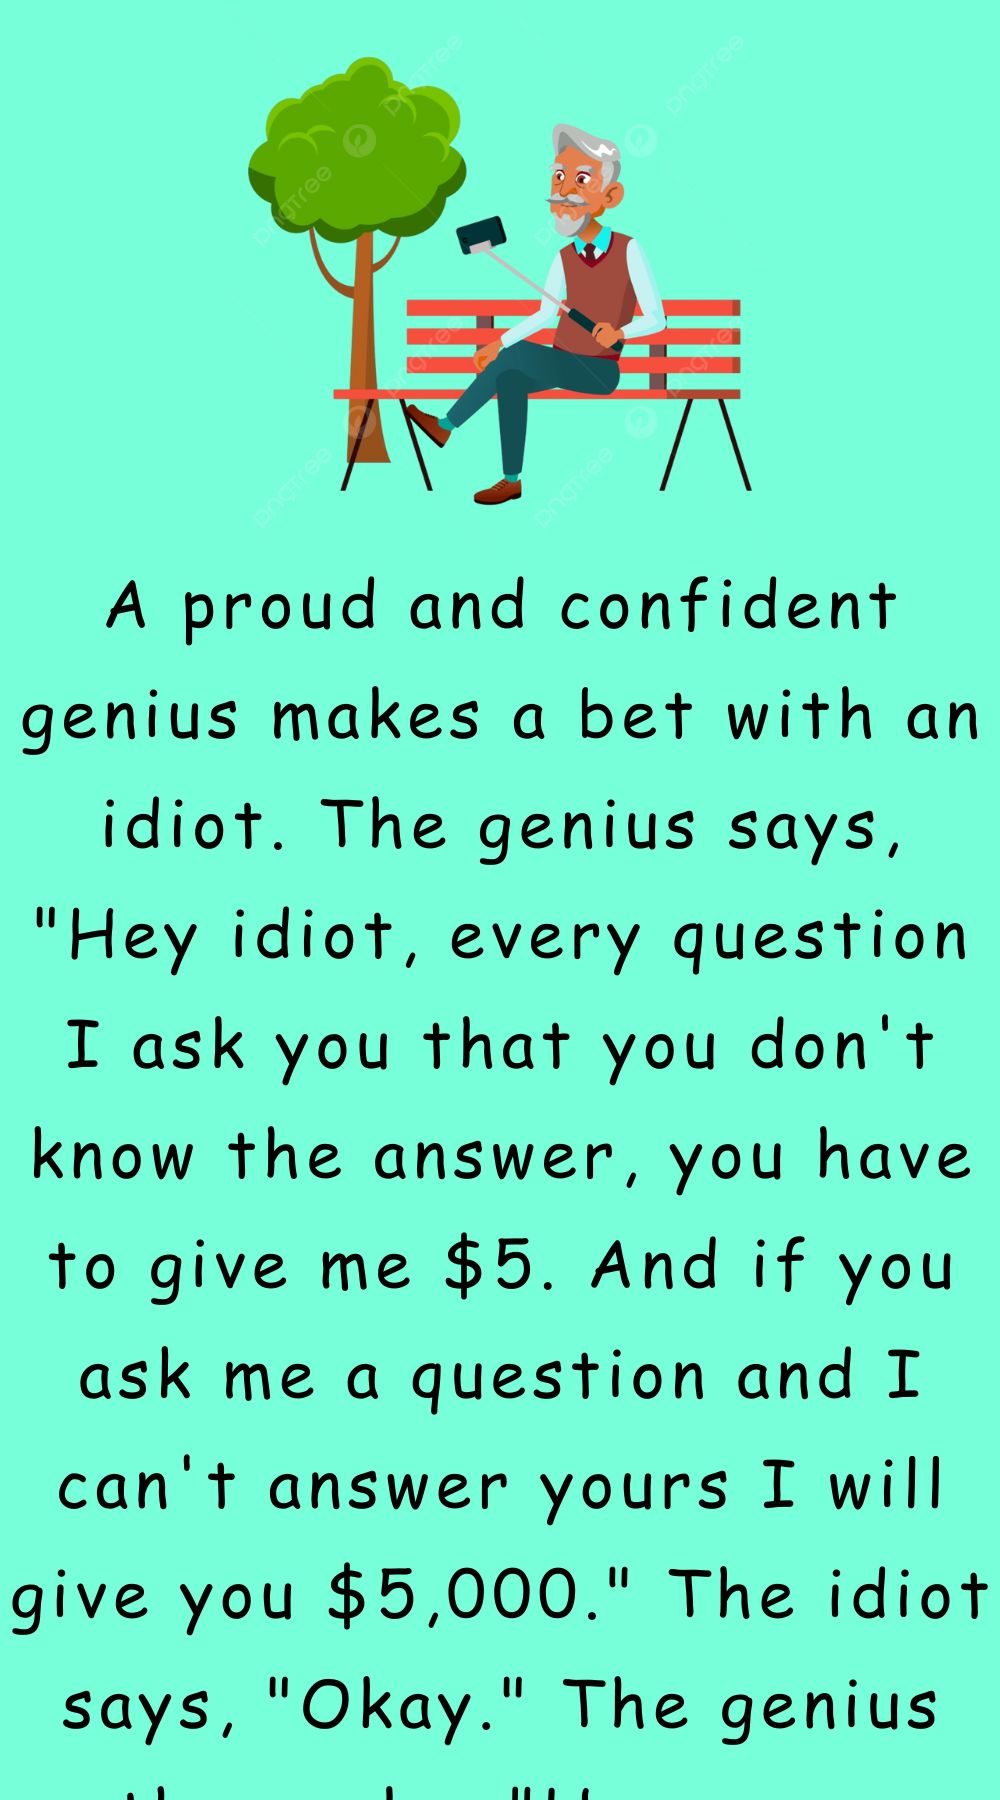 A proud and confident genius makes a bet